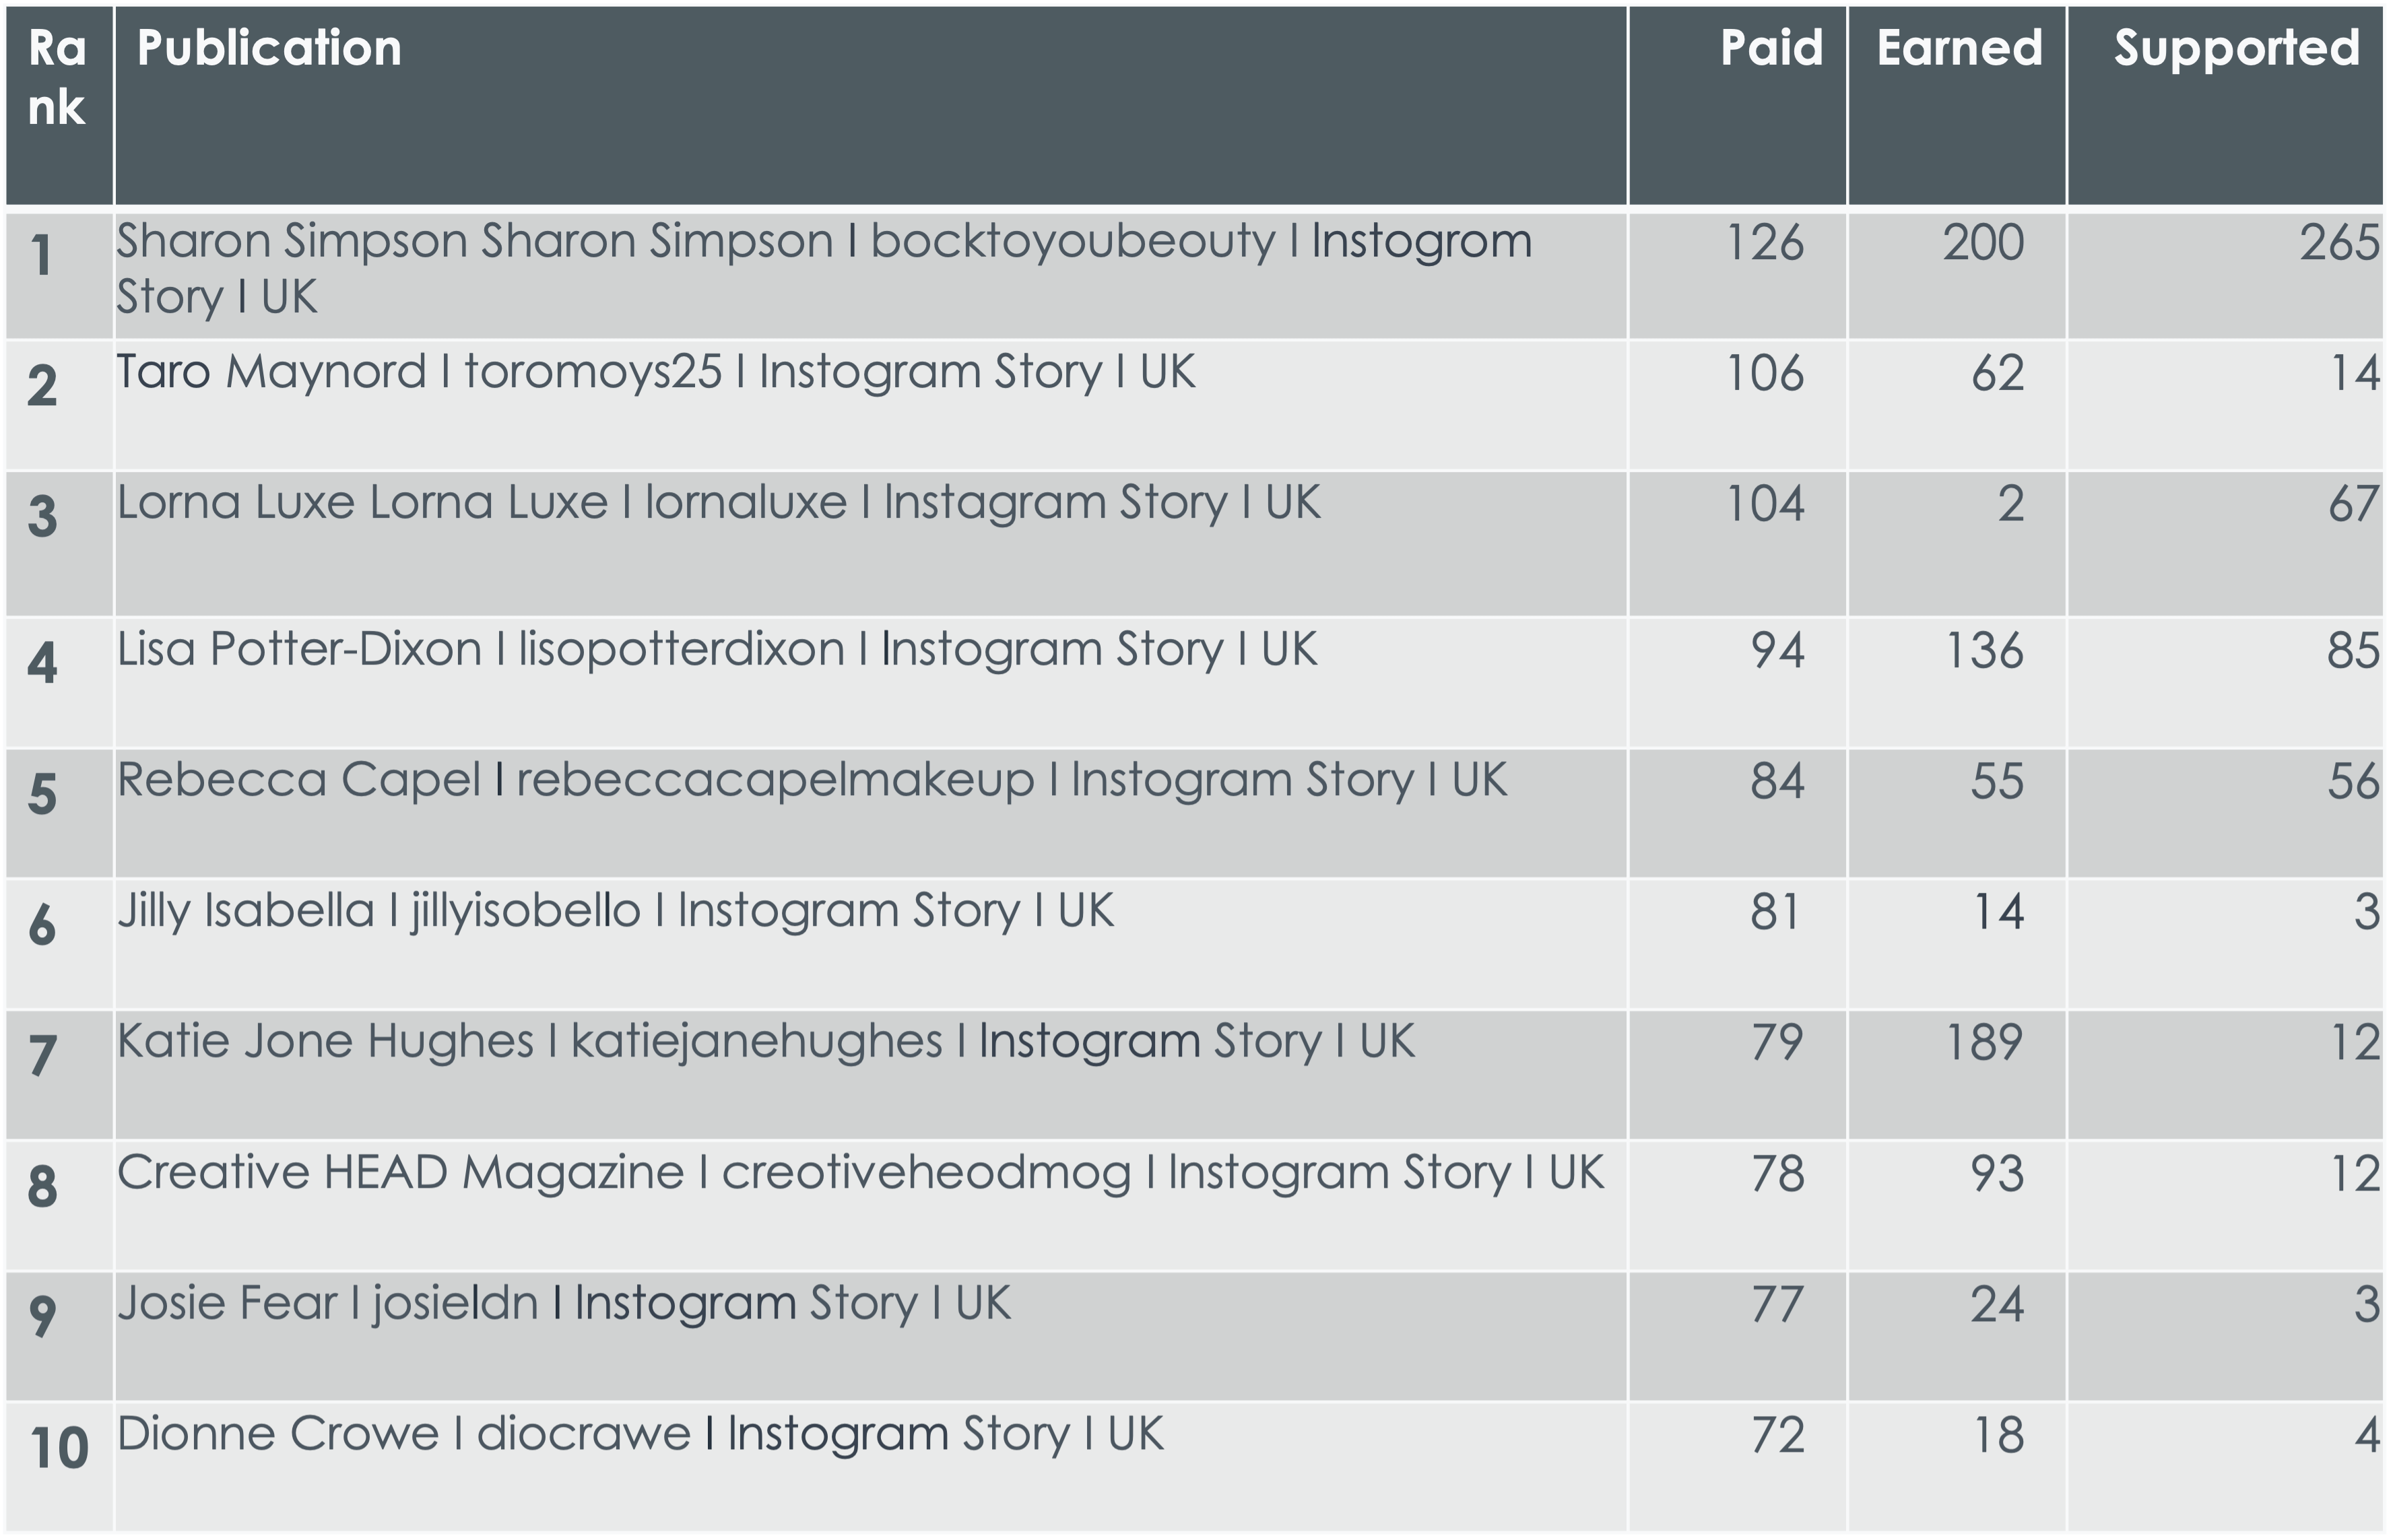 Q1 2022 - The top 10 UK beauty influencers in paid vs. earned vs. supported media ranked by paid mentions